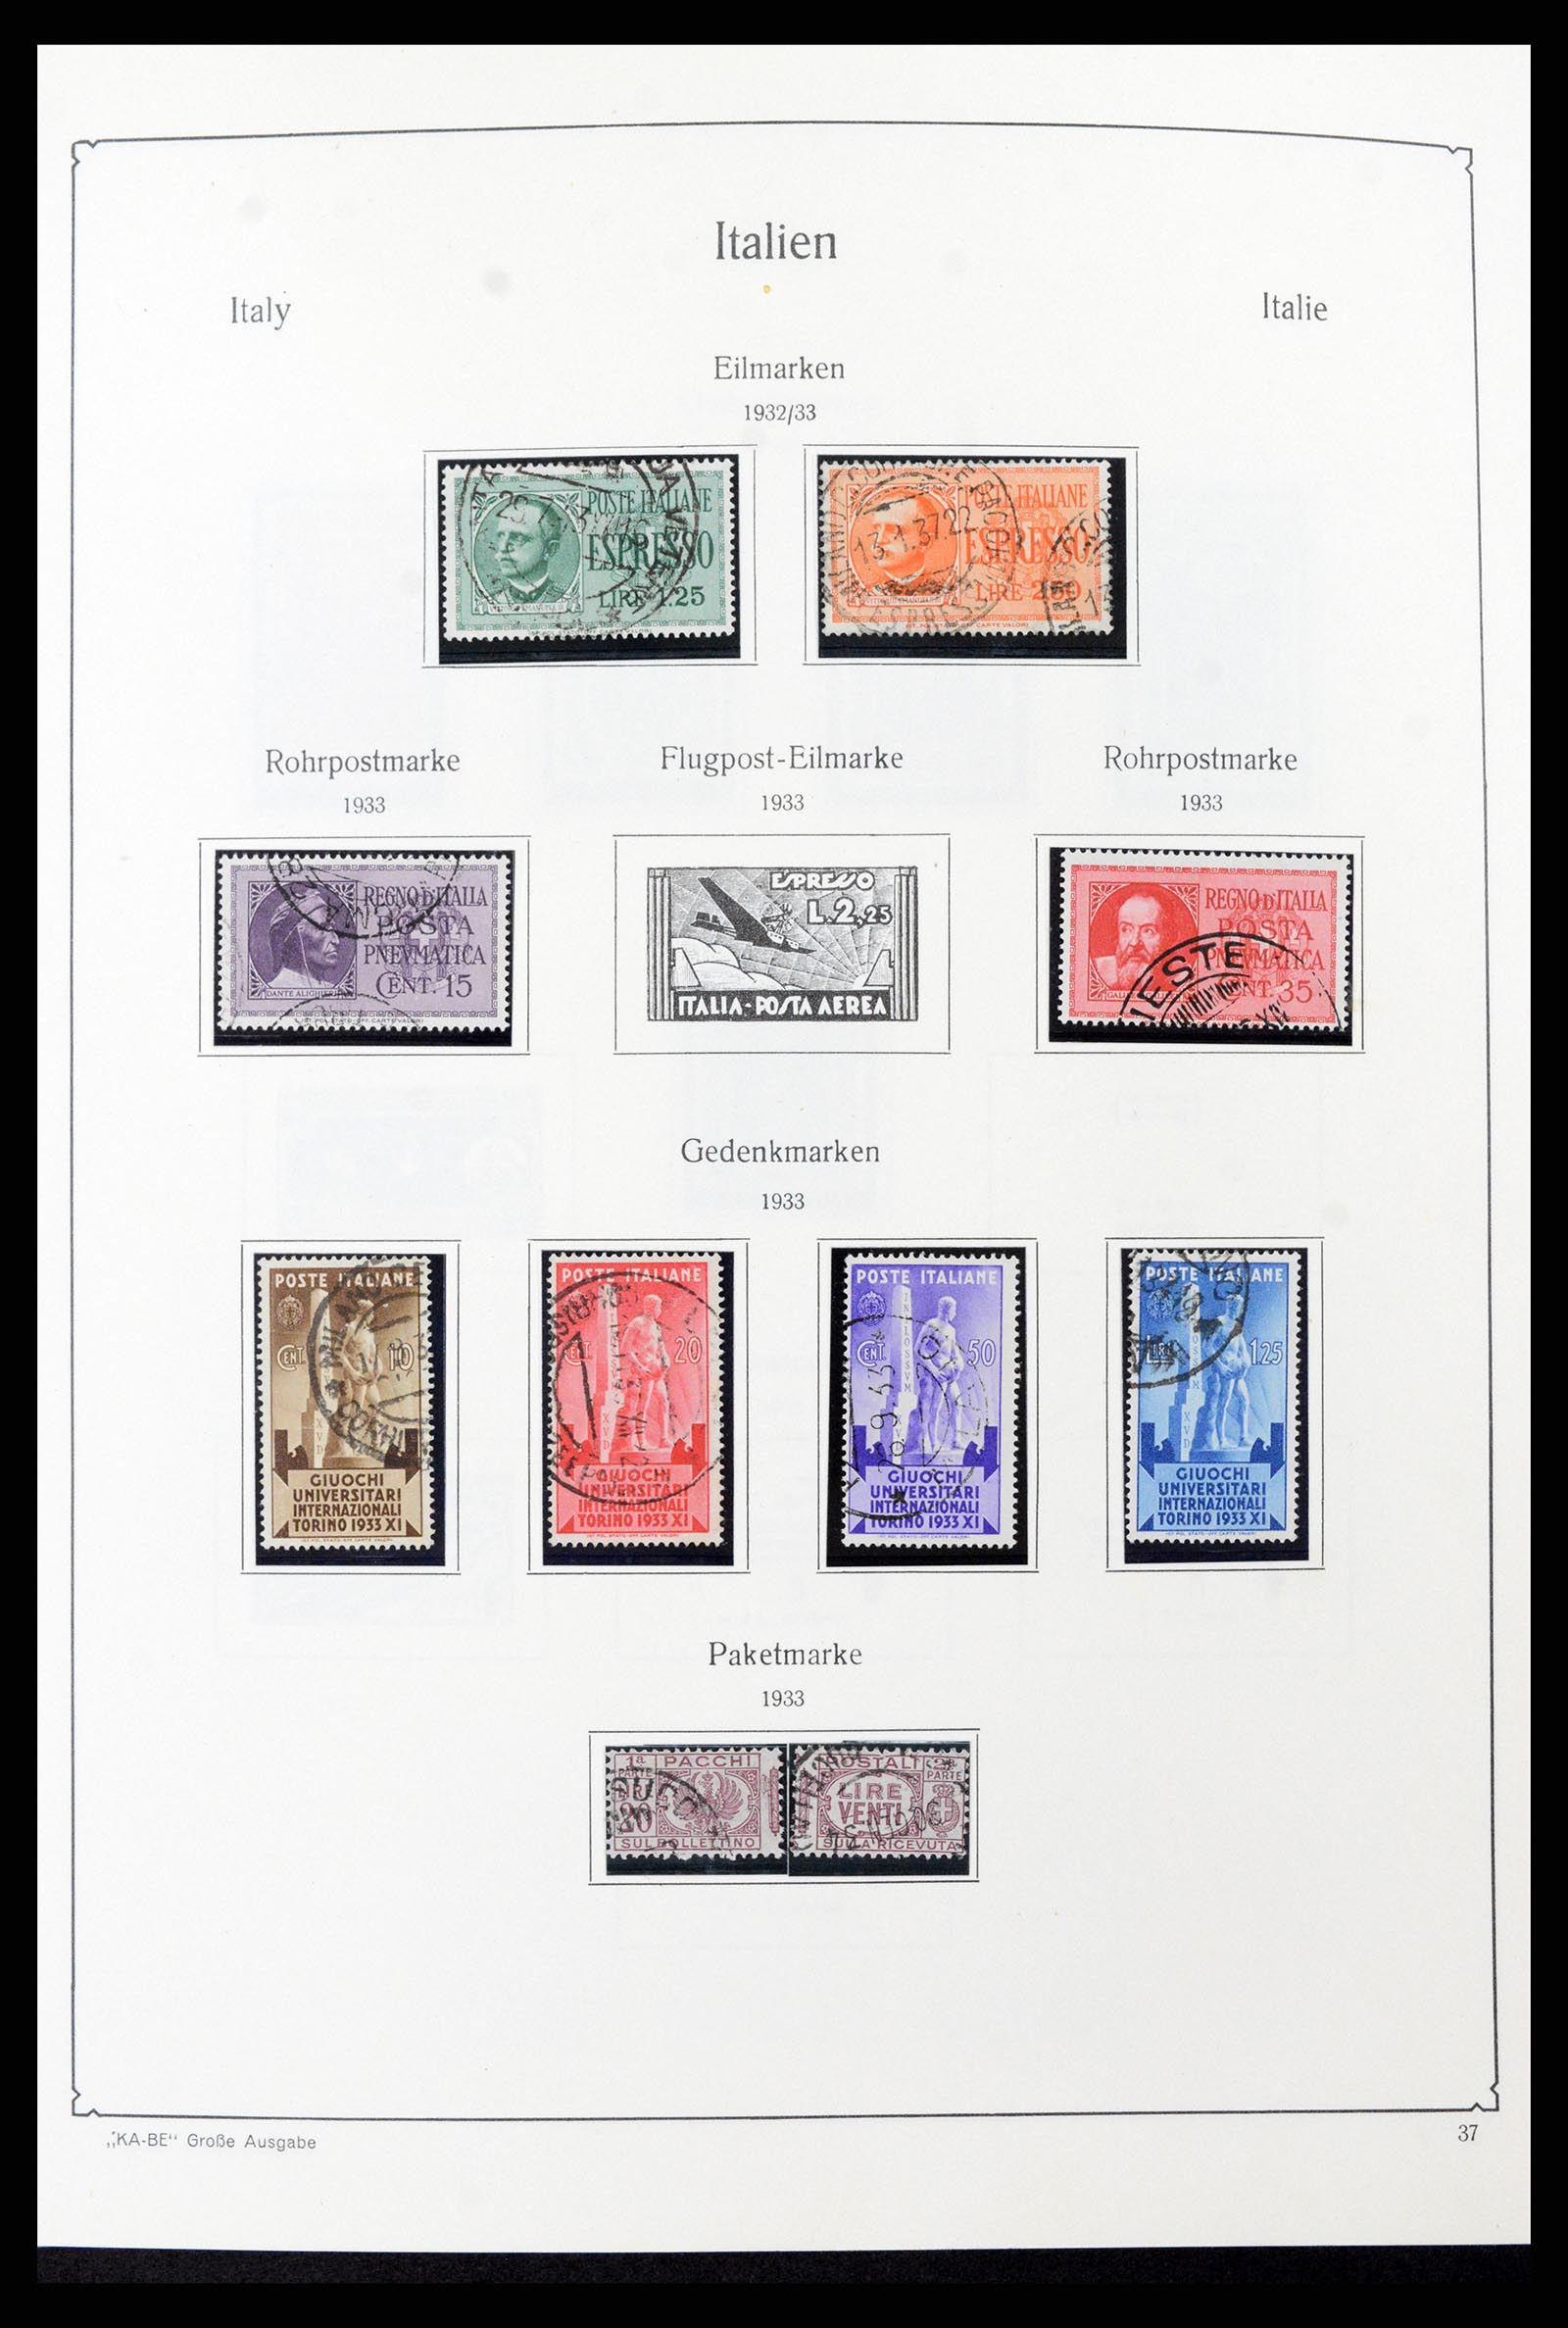 37605 054 - Stamp collection 37605 Italy and States 1855-1974.